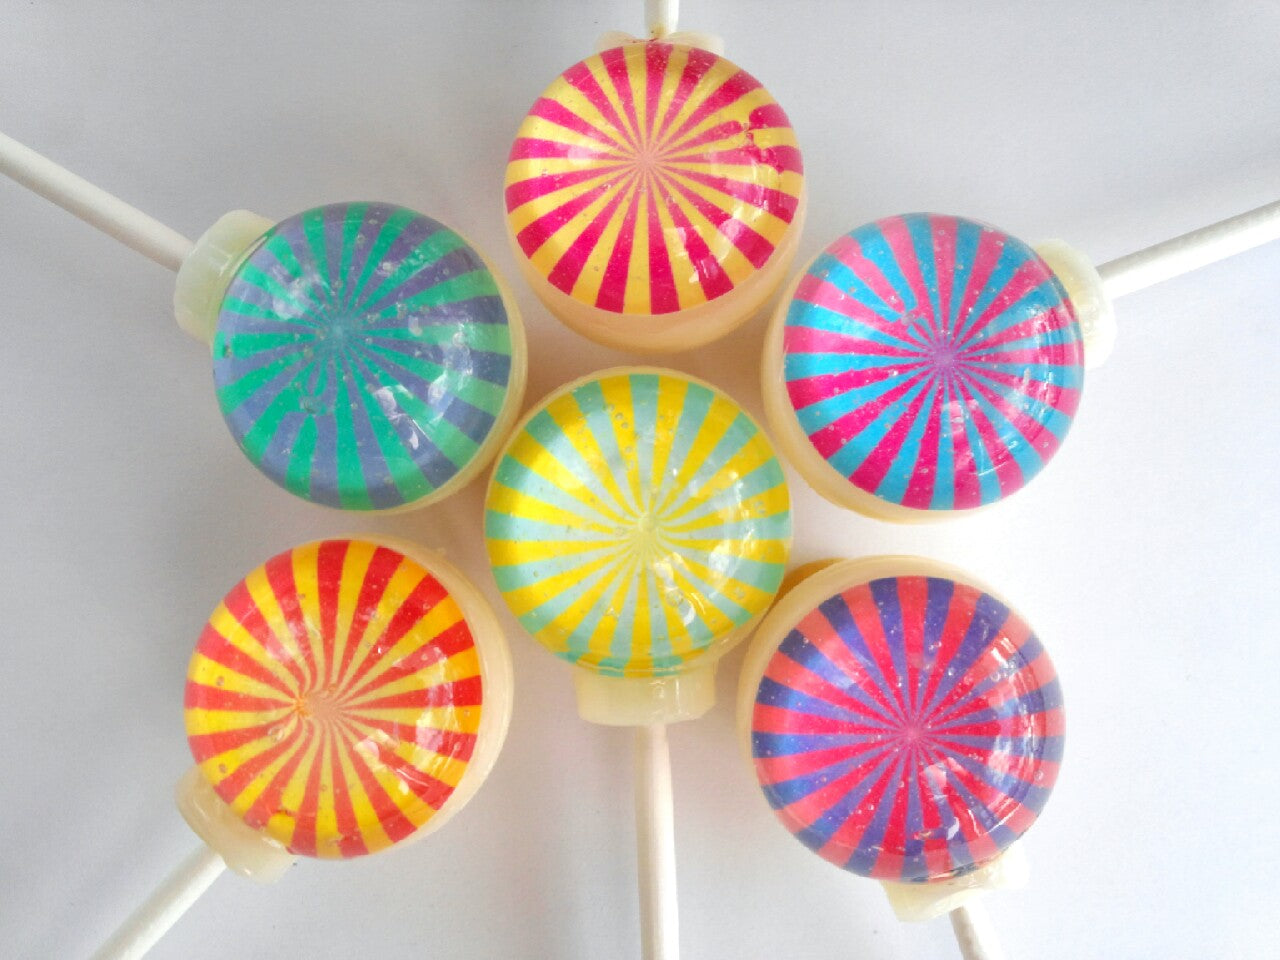 Twirly Whirly Lollipops 6-piece set by I Want Candy!